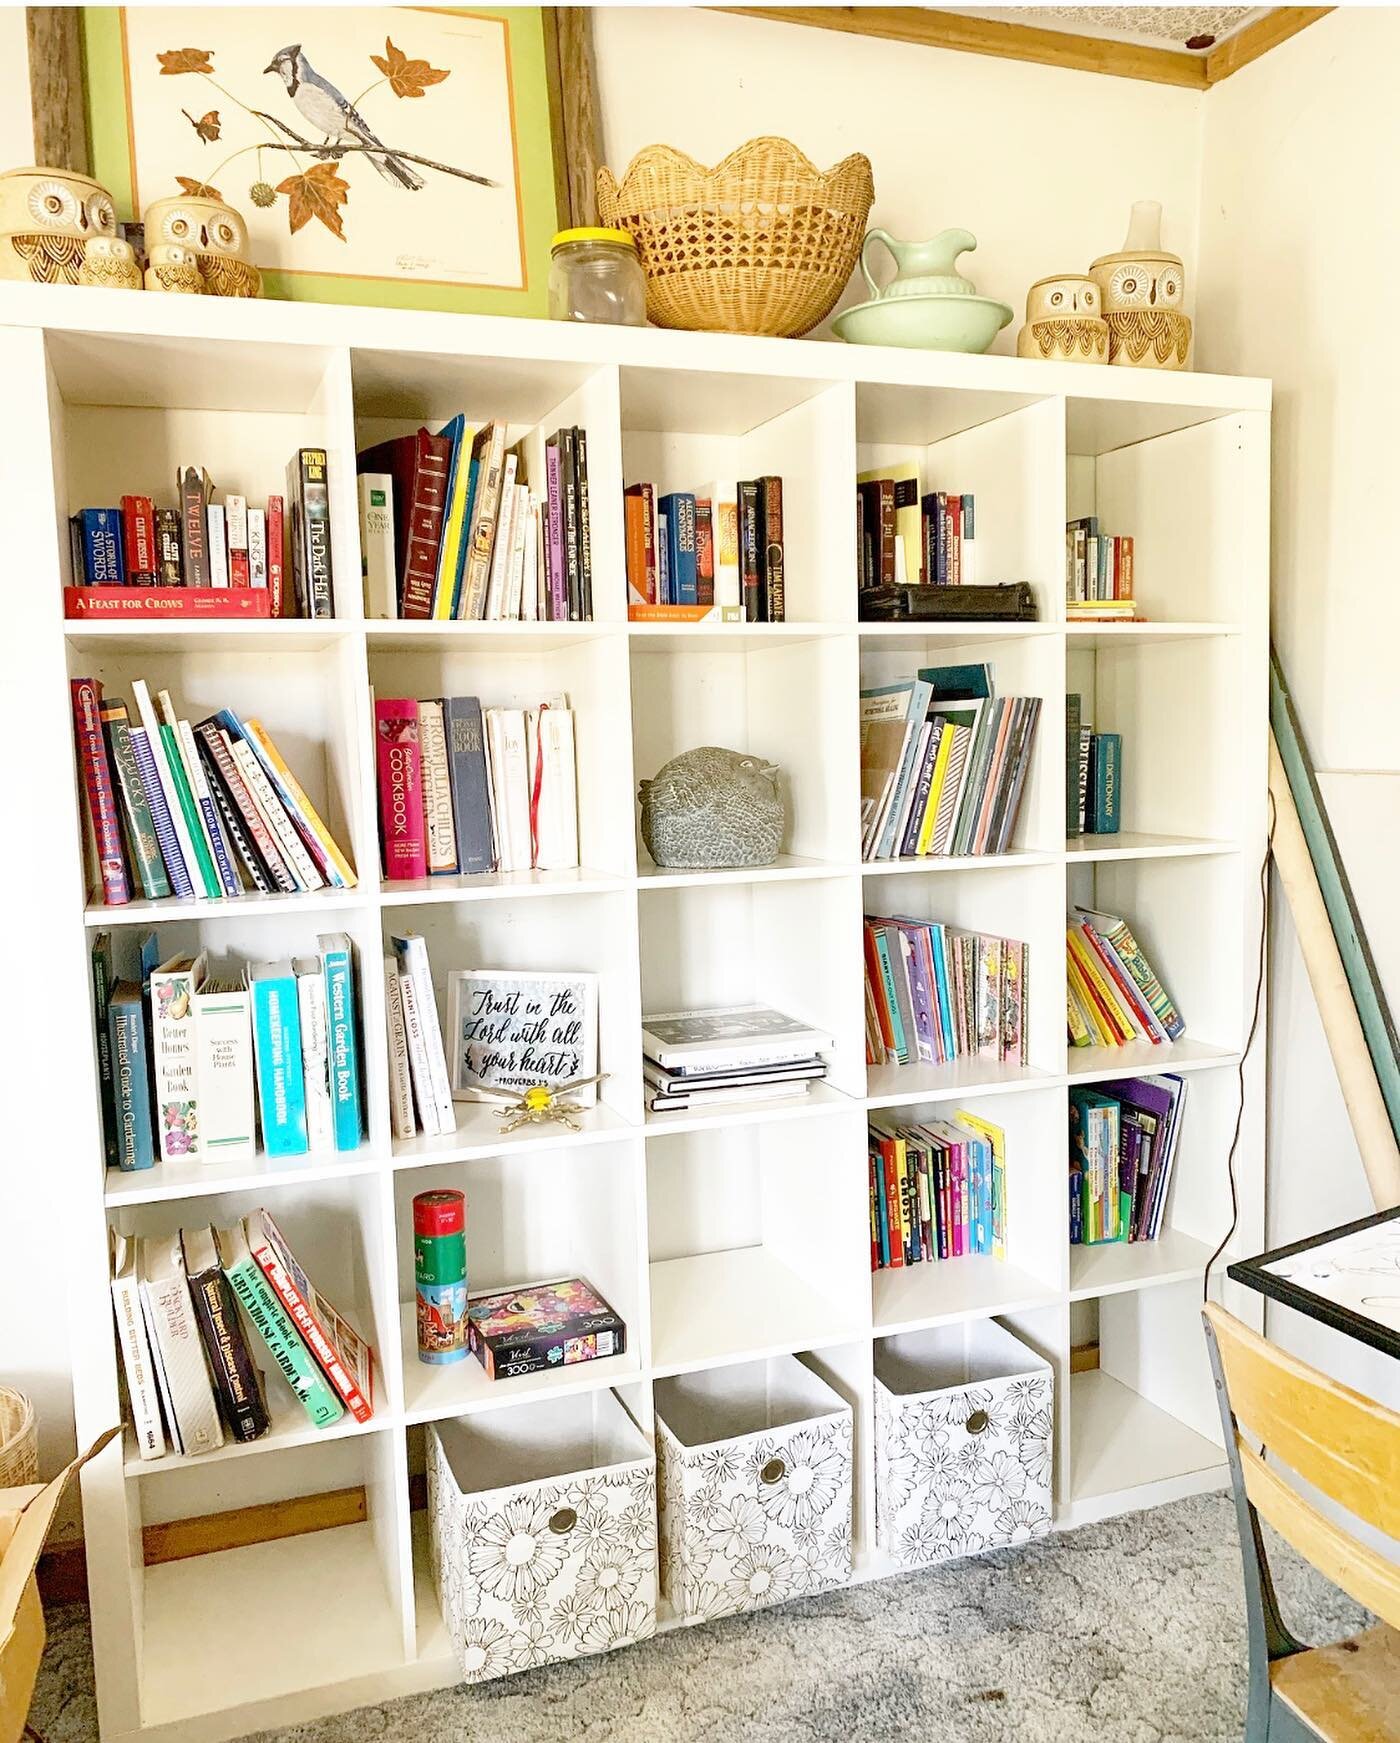 Family library area coming in hot!
Also.... peep those incredible owl canisters from @the_merq !!!! I&rsquo;ve finally found a home for them and am so in love. 
.
.
#homeschool #library #school #homeschooling #interiordesign #charlottemason #thirdgra